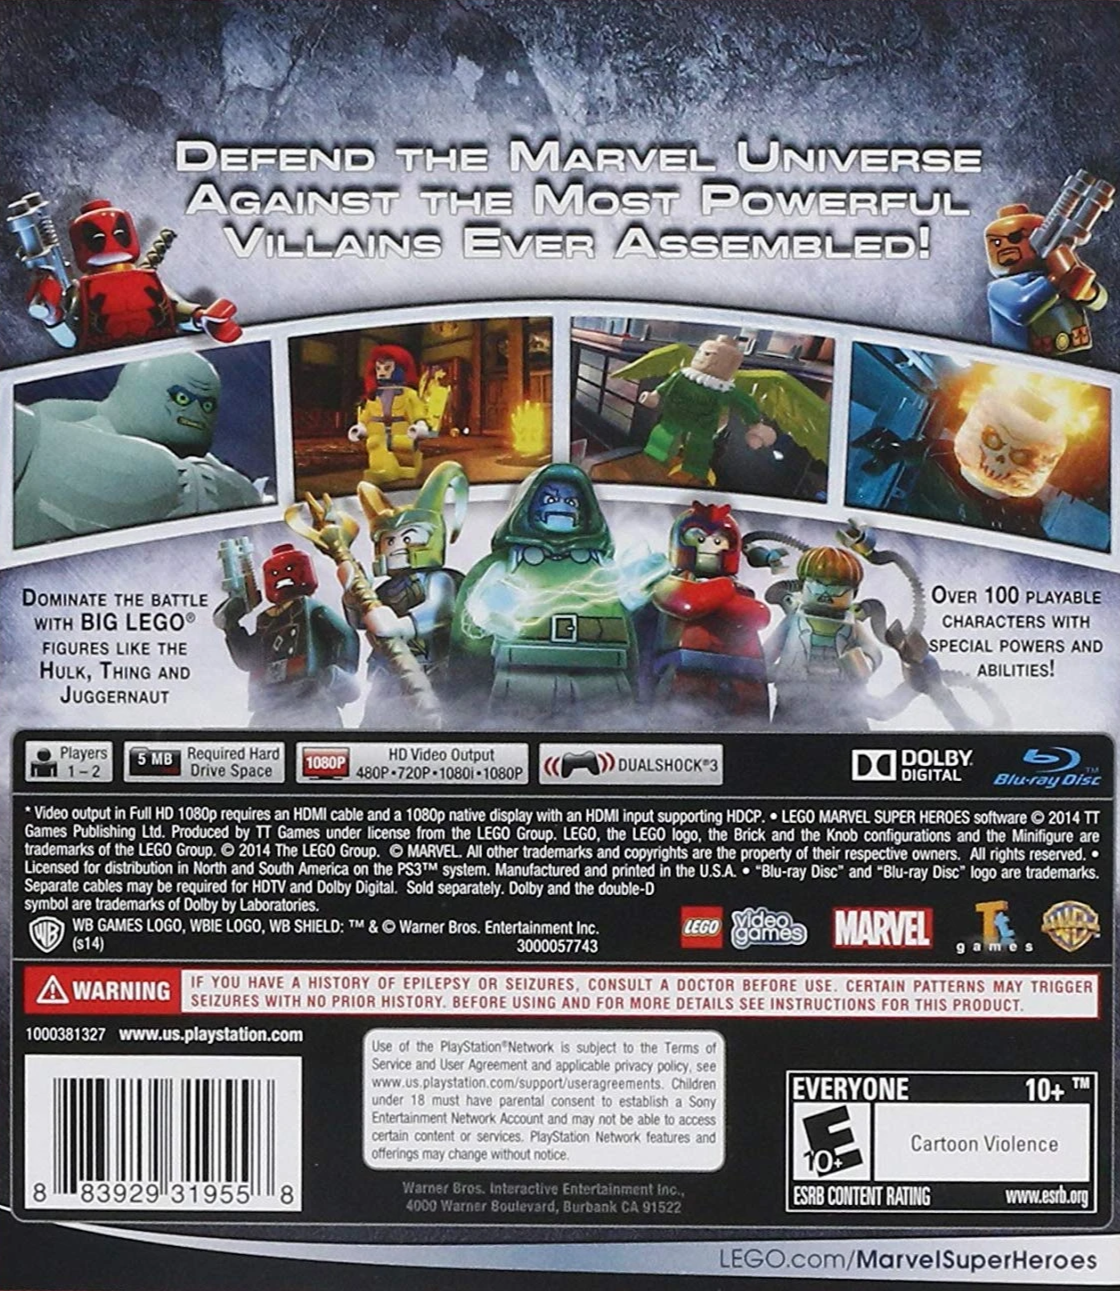 LEGO Marvel Super Heroes (Greatest Hits) - PlayStation 3 (PS3) Game